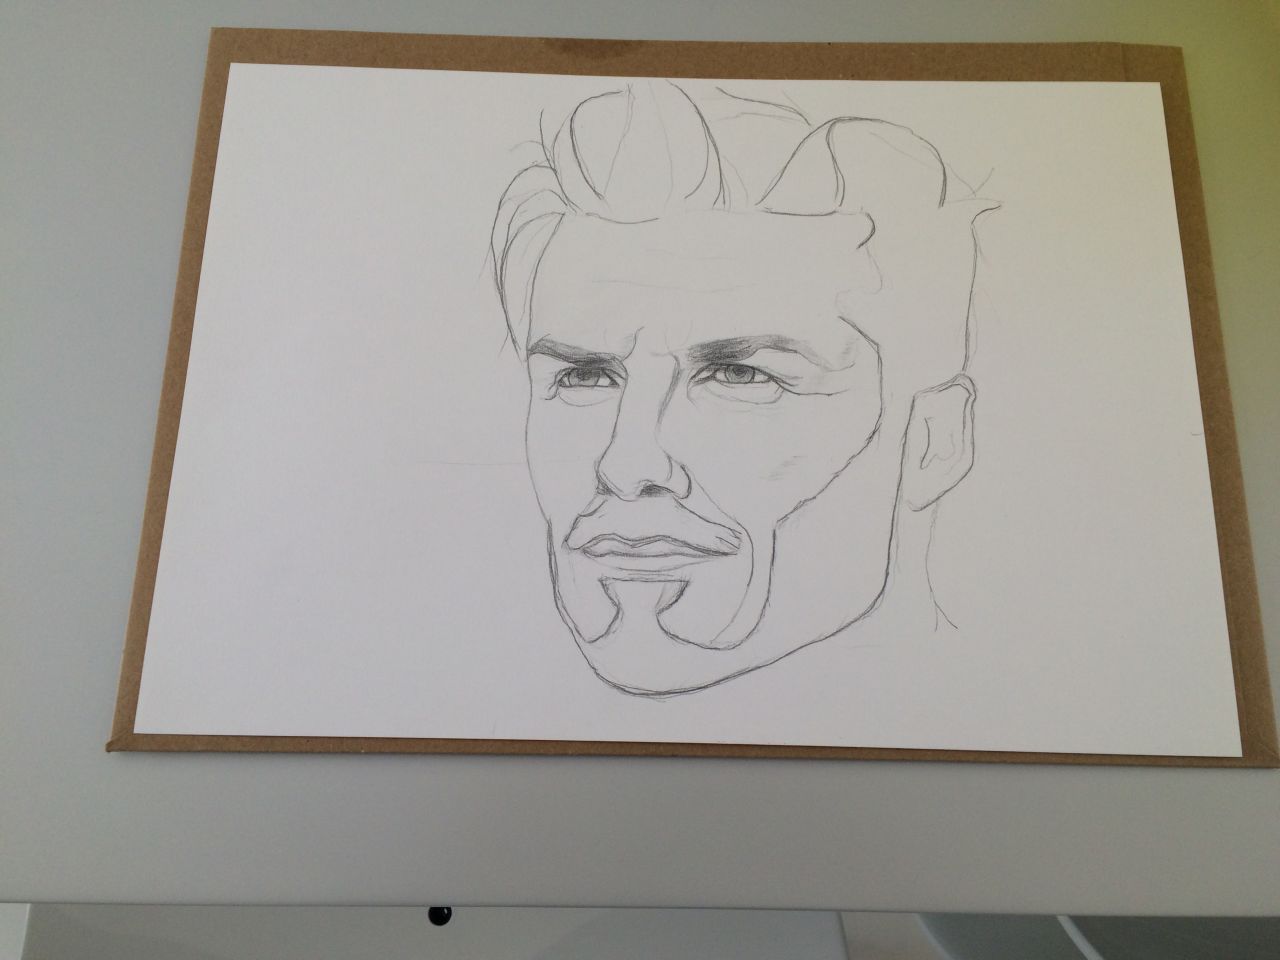 You might know this famous face -- David Beckham, the former Manchester United and England star, who also played for Real Madrid, AC Milan, LA Galaxy and Paris Saint-Germain. Beckham shared the portrait after being impressed with Fraser's artistry. 